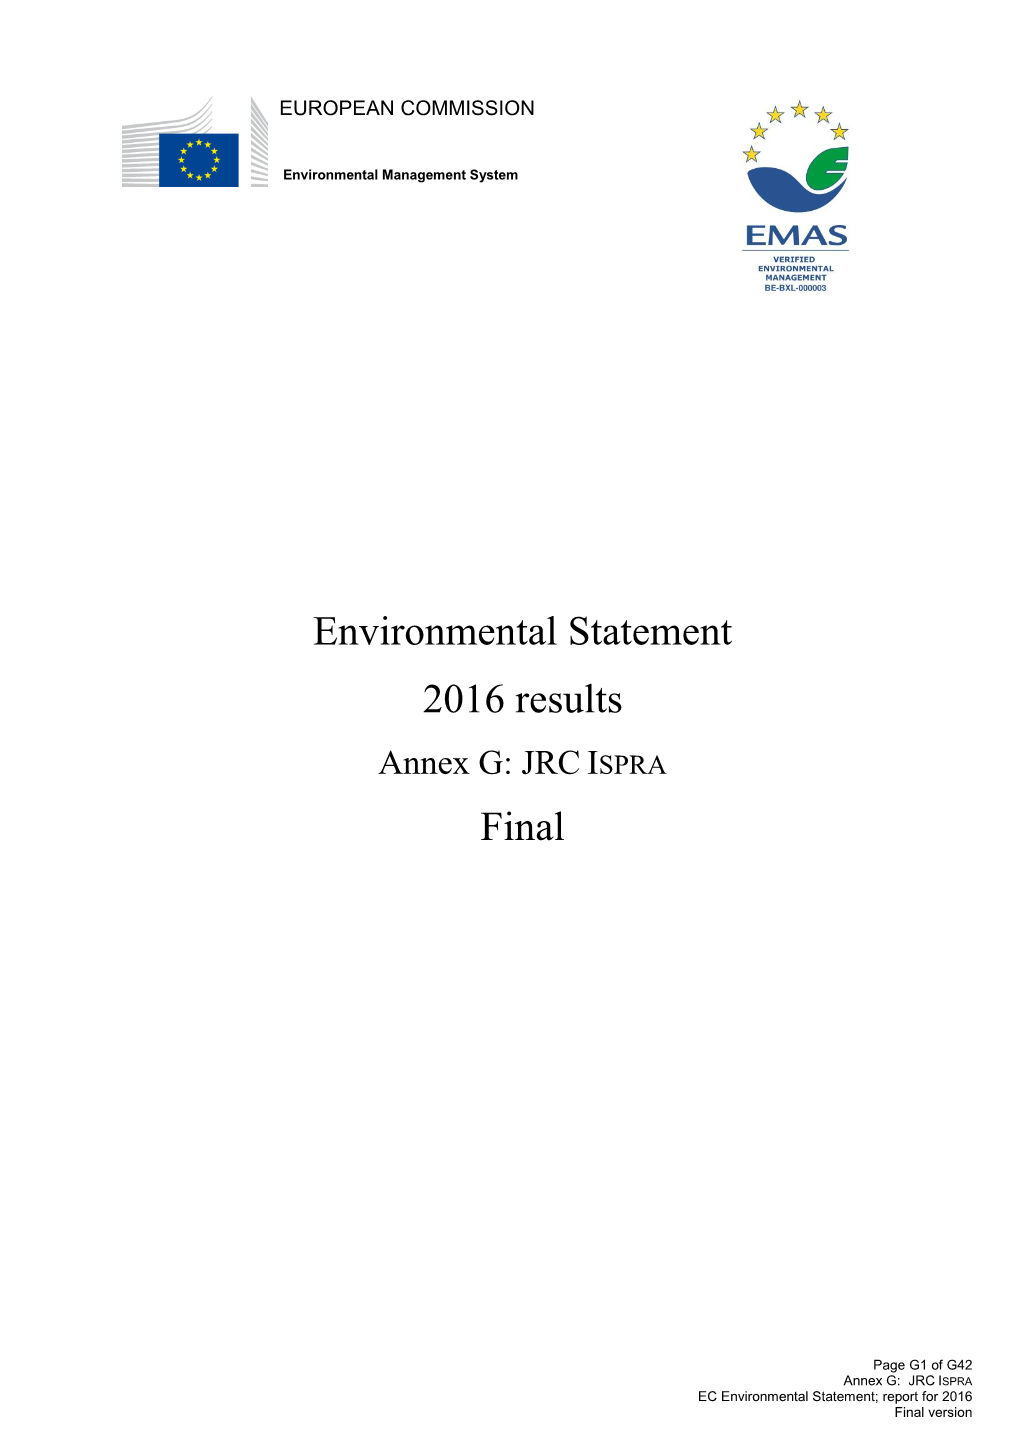 Environmental Statement 2016 Results Final